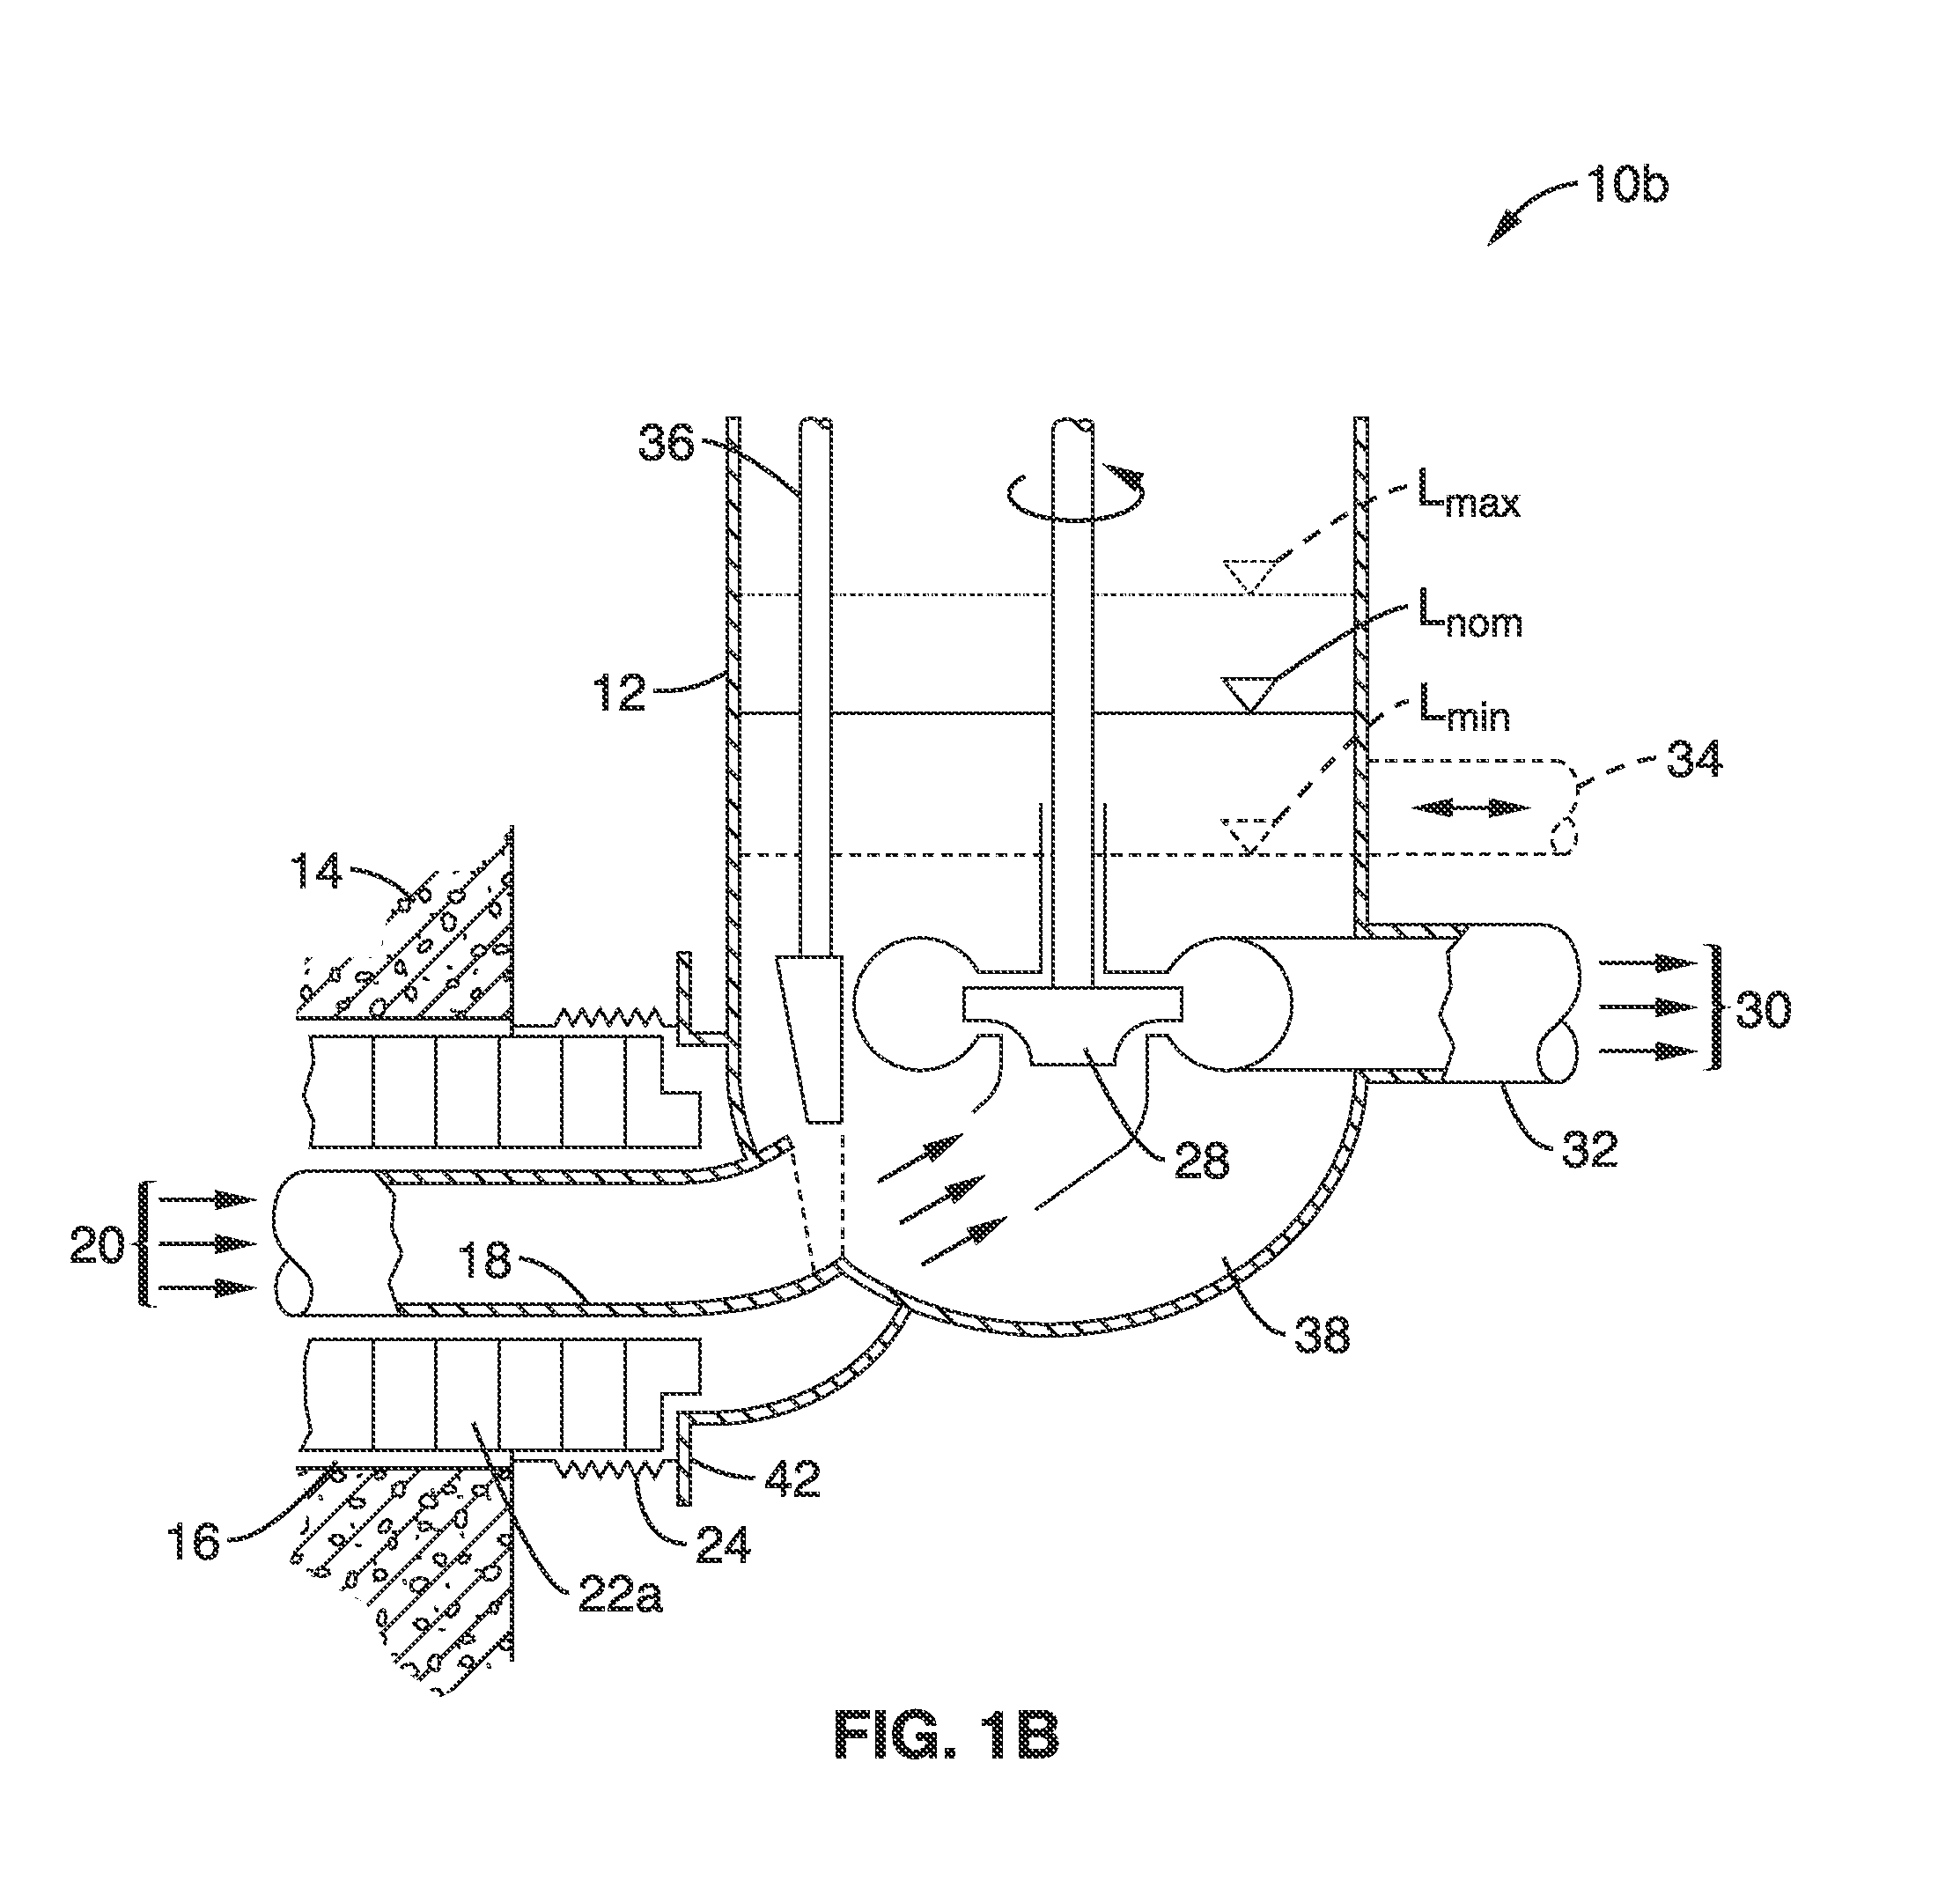 Systems and methods for enhancing isolation of high-temperature reactor containments